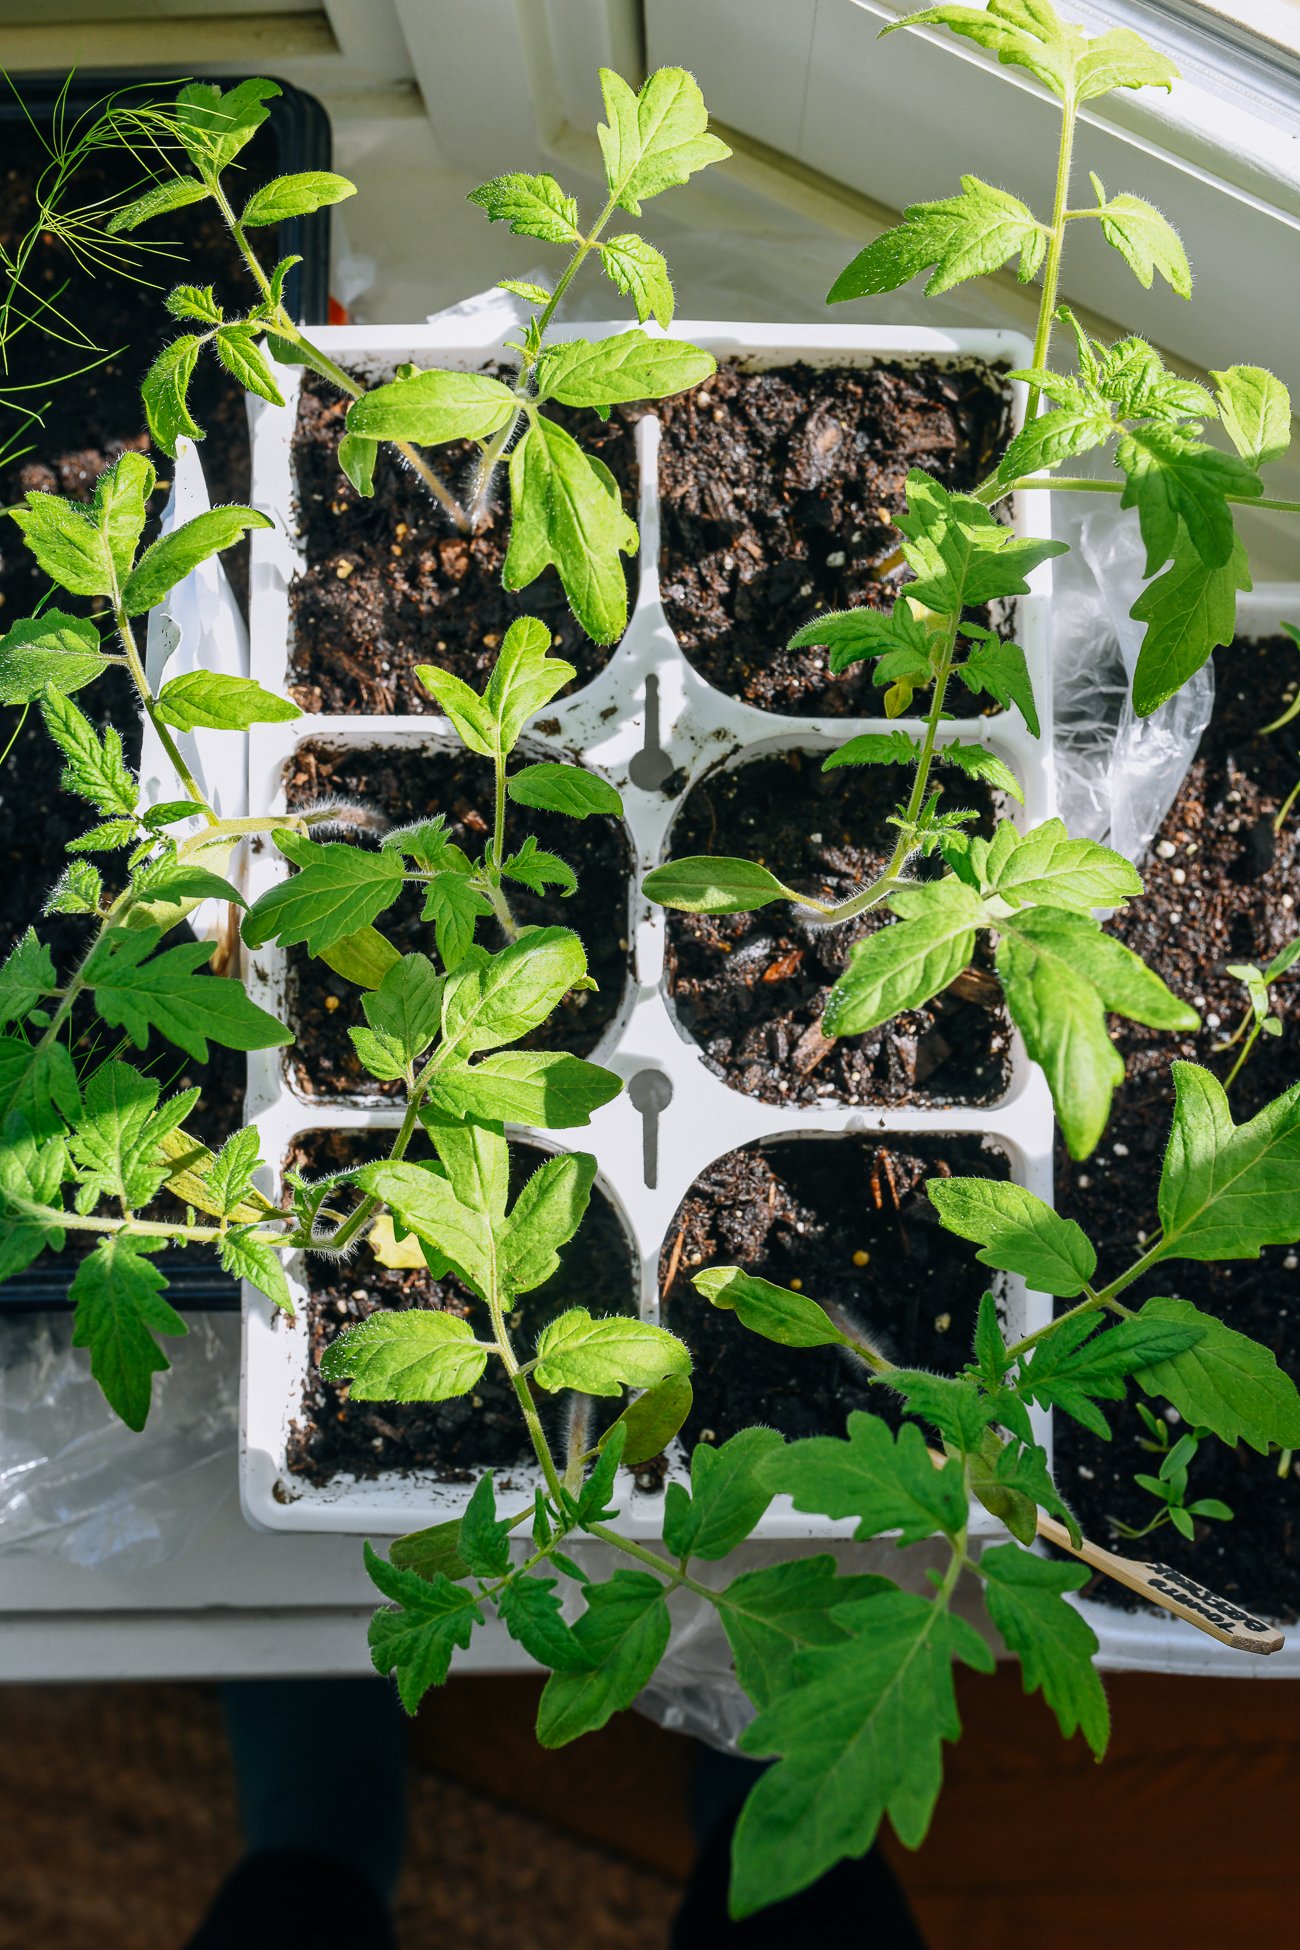 Tomato seedlings in a 6-cell tray